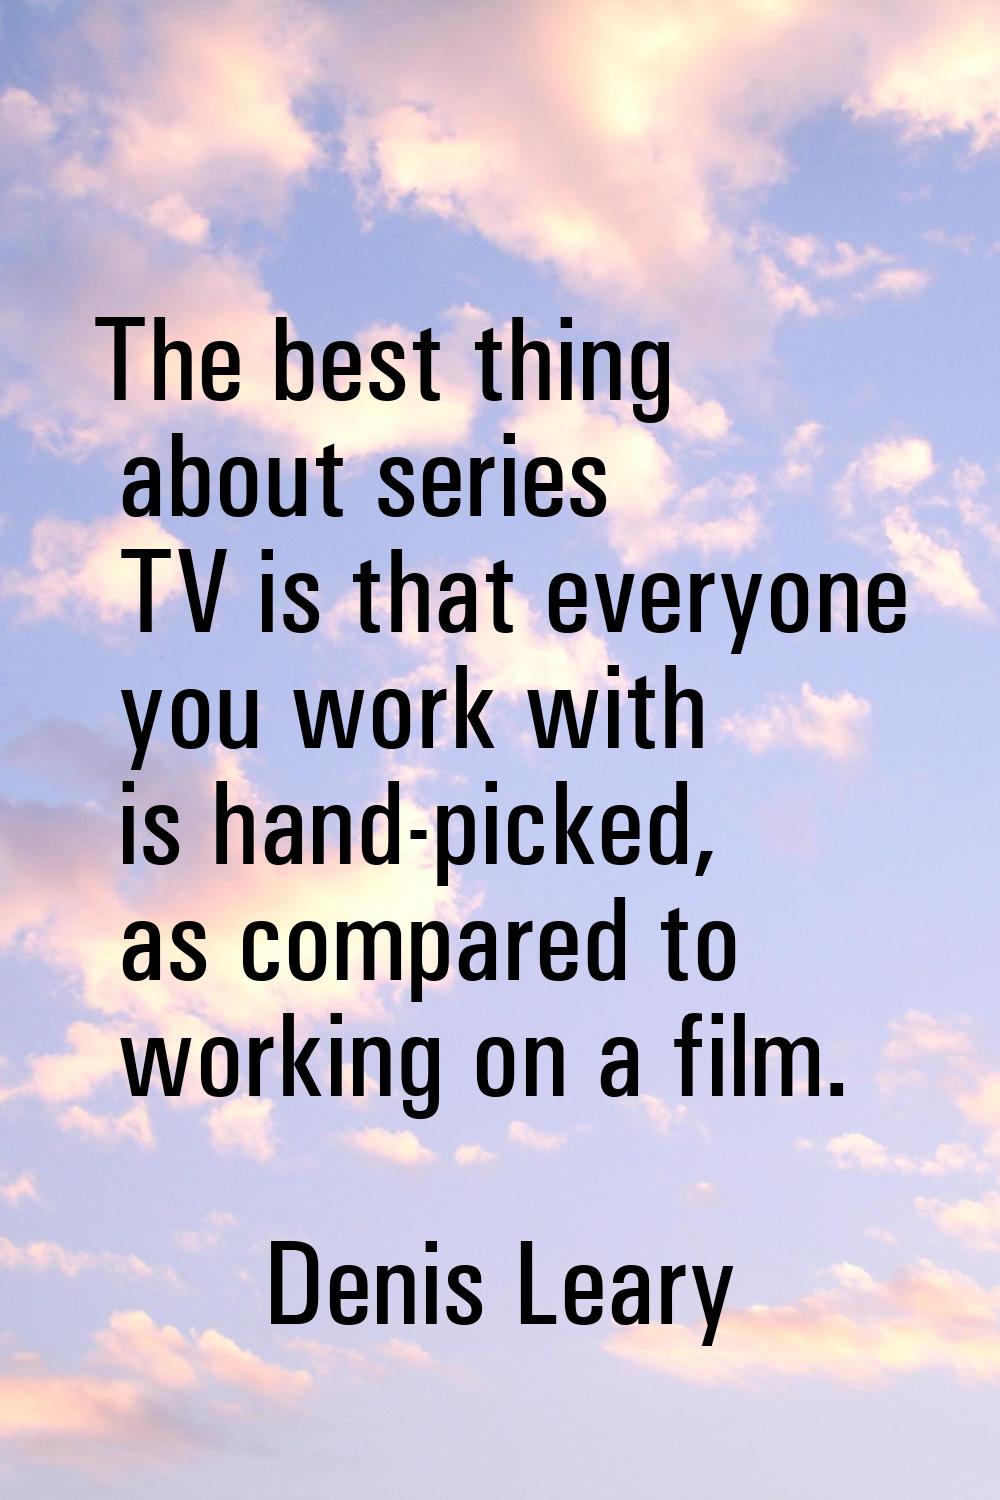 The best thing about series TV is that everyone you work with is hand-picked, as compared to workin